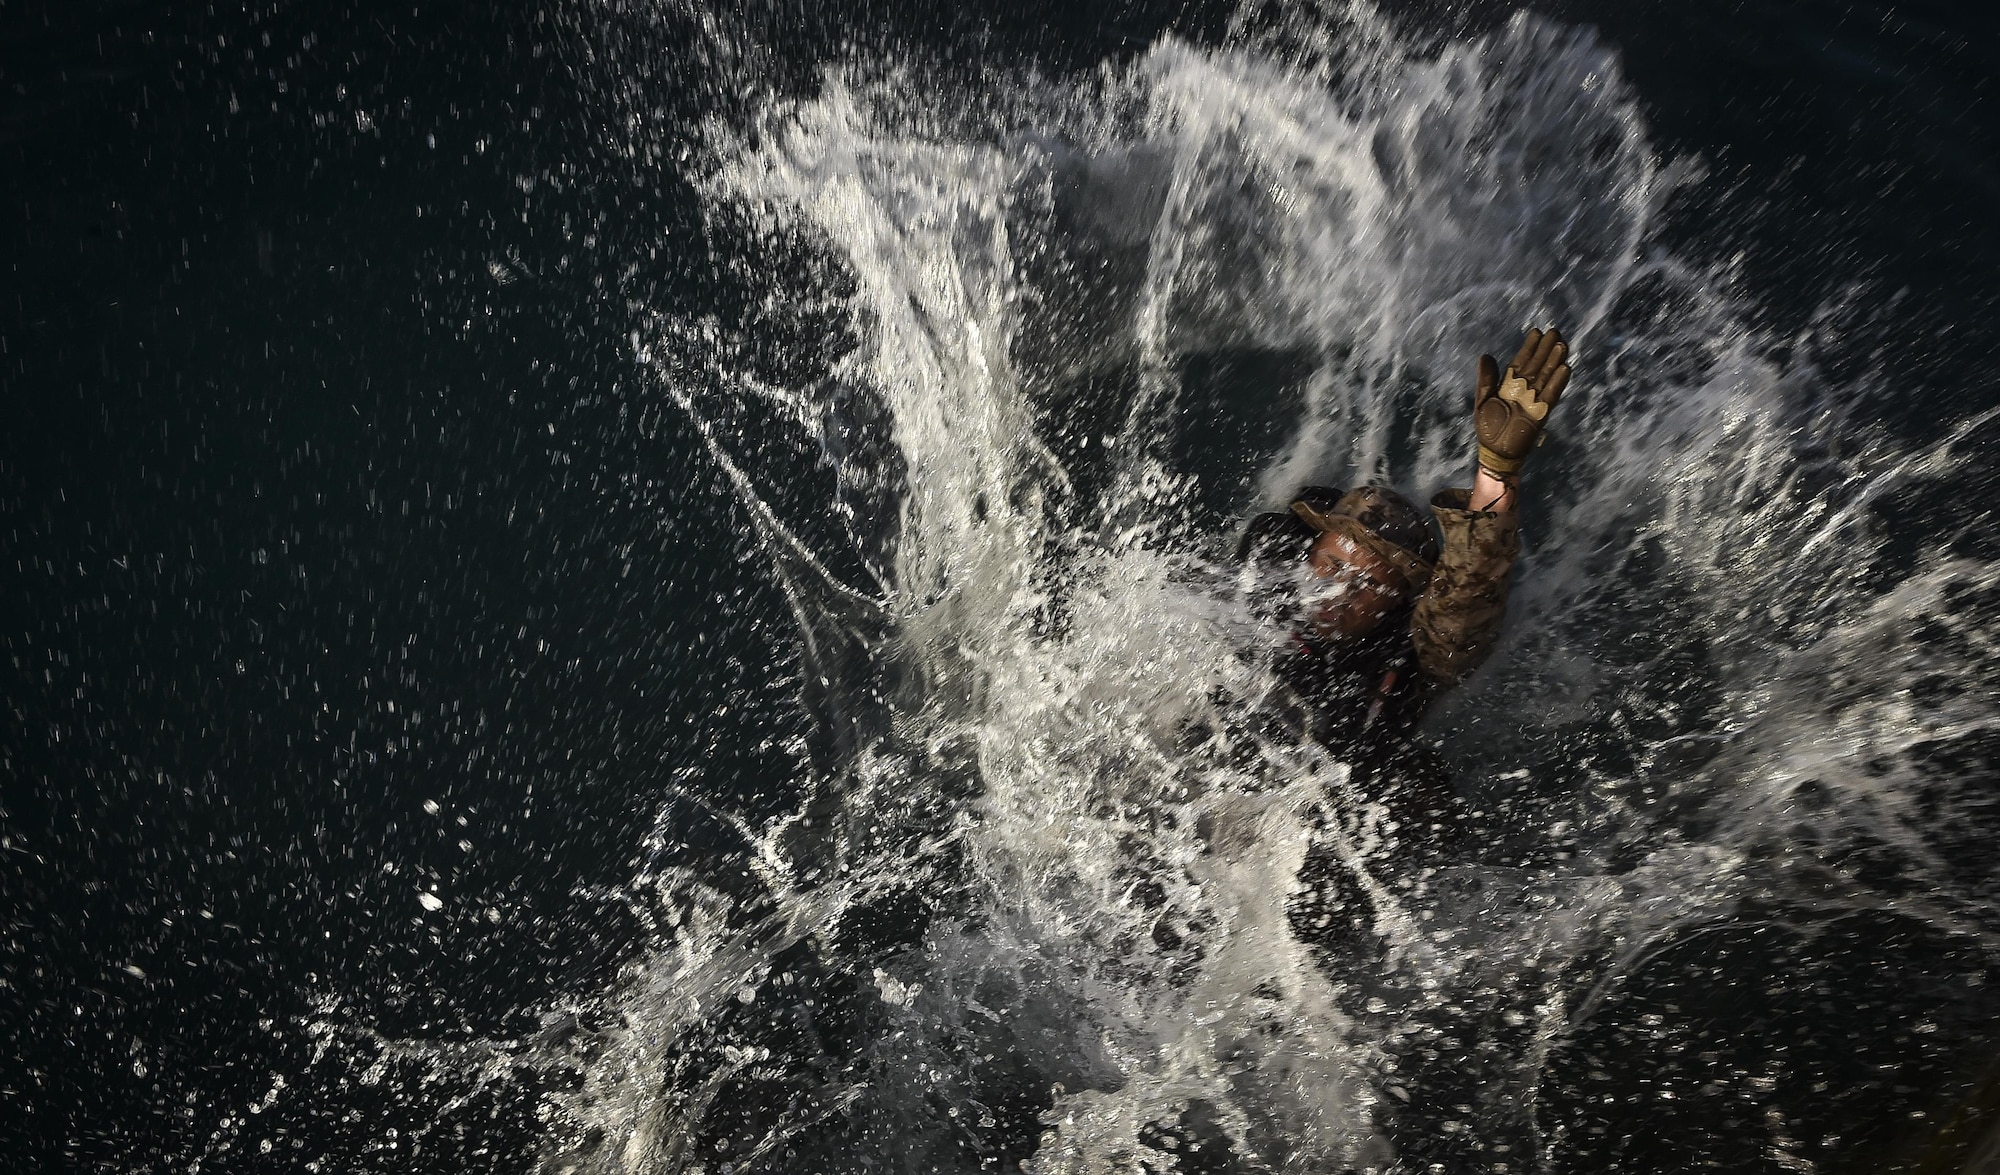 A U.S. Marine practices helocasting off a sea wall during Marine Special Operations School’s Individual Training Course, March 21, 2017, at Key West, Fla. For the first time, U.S. Air Force Special Tactics Airmen spent three months in Marine Special Operations Command’s Marine Raider training pipeline, representing efforts to build joint mindsets across special operations forces.  (U.S. Air Force photo by Senior Airman Ryan Conroy)